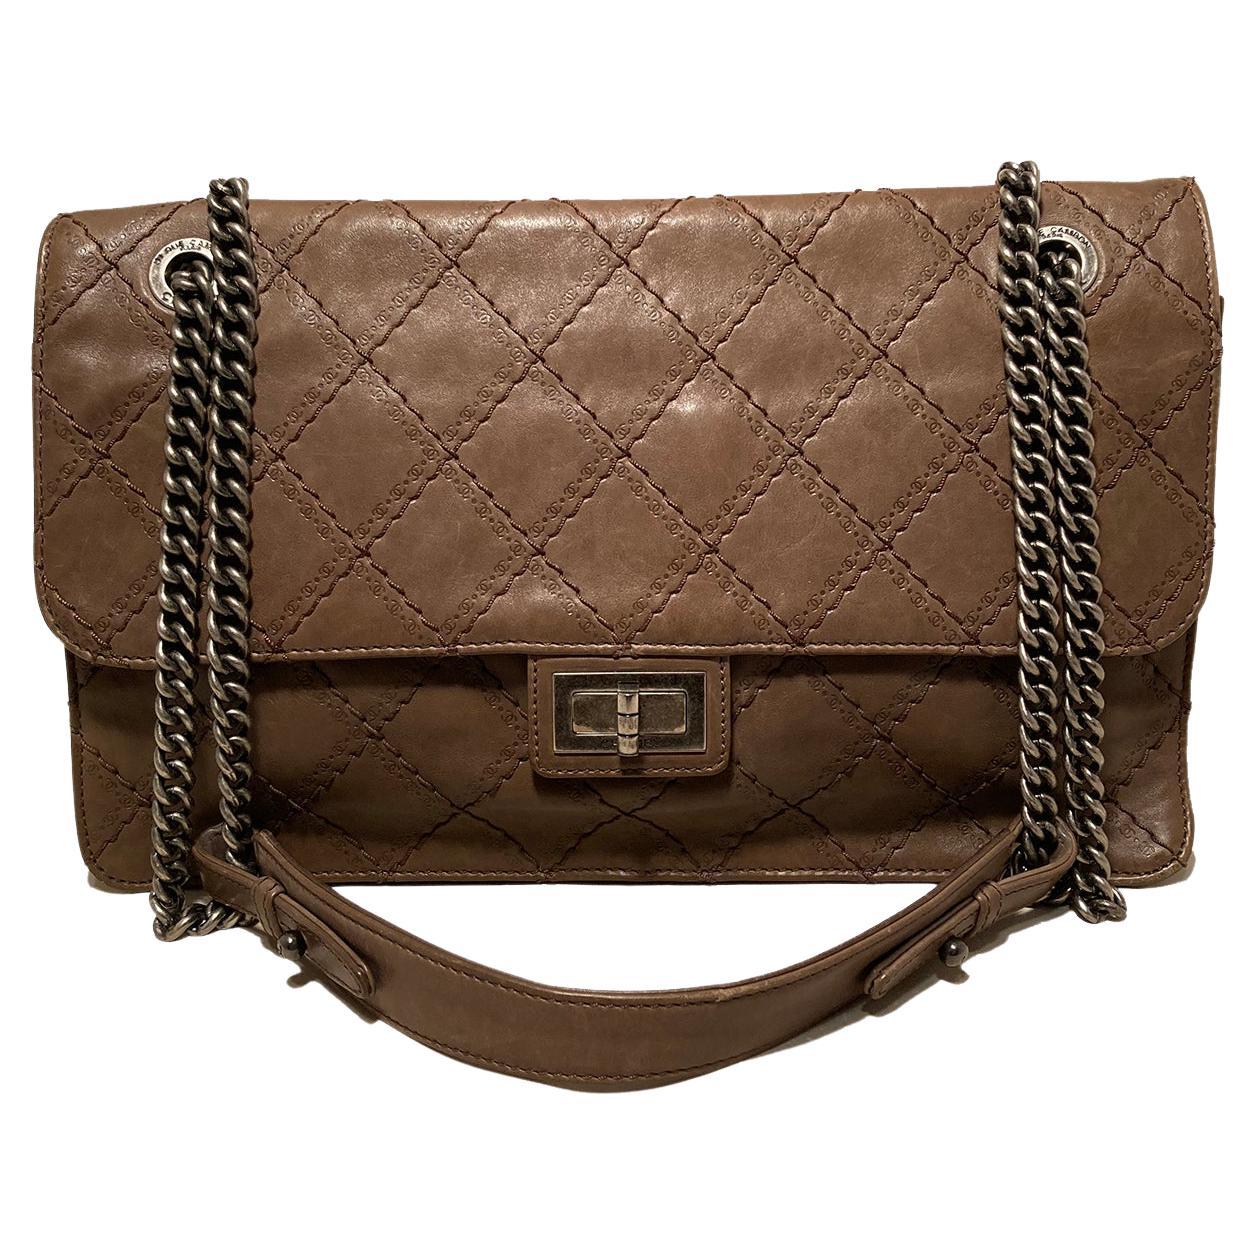 Chanel Brown Embossed Quilted Leather Classic Flap